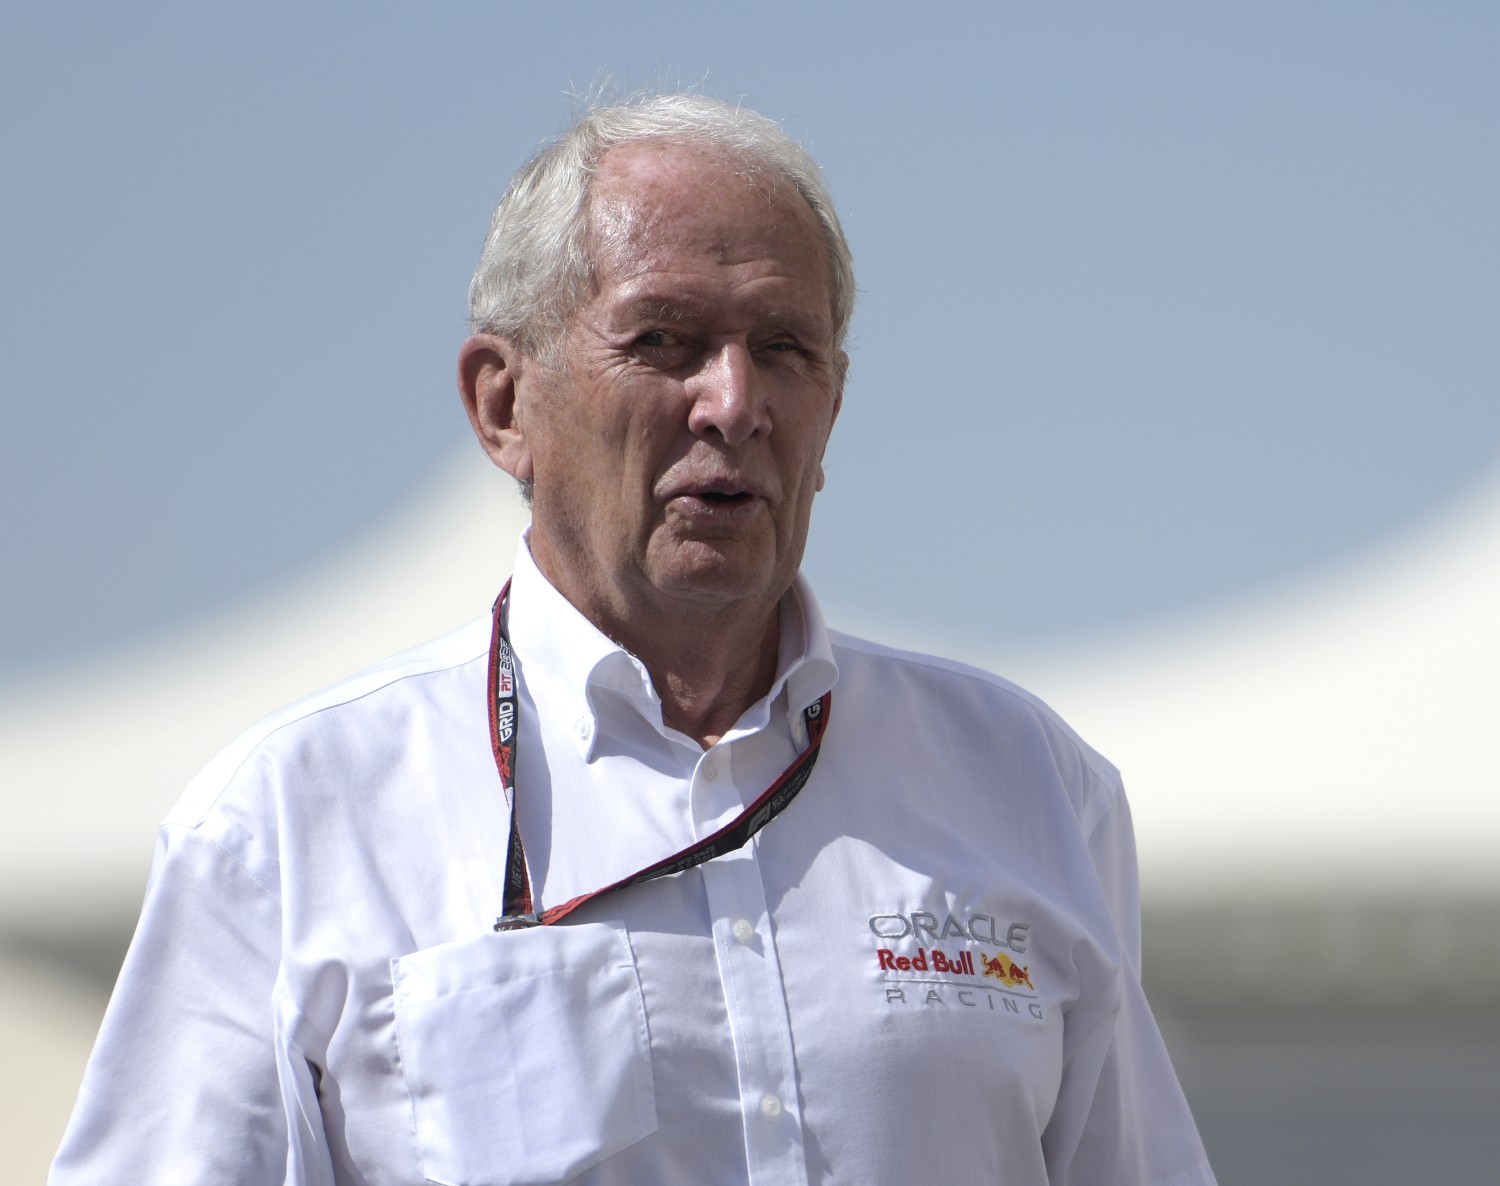 Red Bull Racing Team Consultant Dr Helmut Marko walks in the paddock prior to practice ahead of the F1 Grand Prix of Abu Dhabi at Yas Marina Circuit on November 18, 2022 in Abu Dhabi, United Arab Emirates. (Photo by Rudy Carezzevoli/Getty Images)